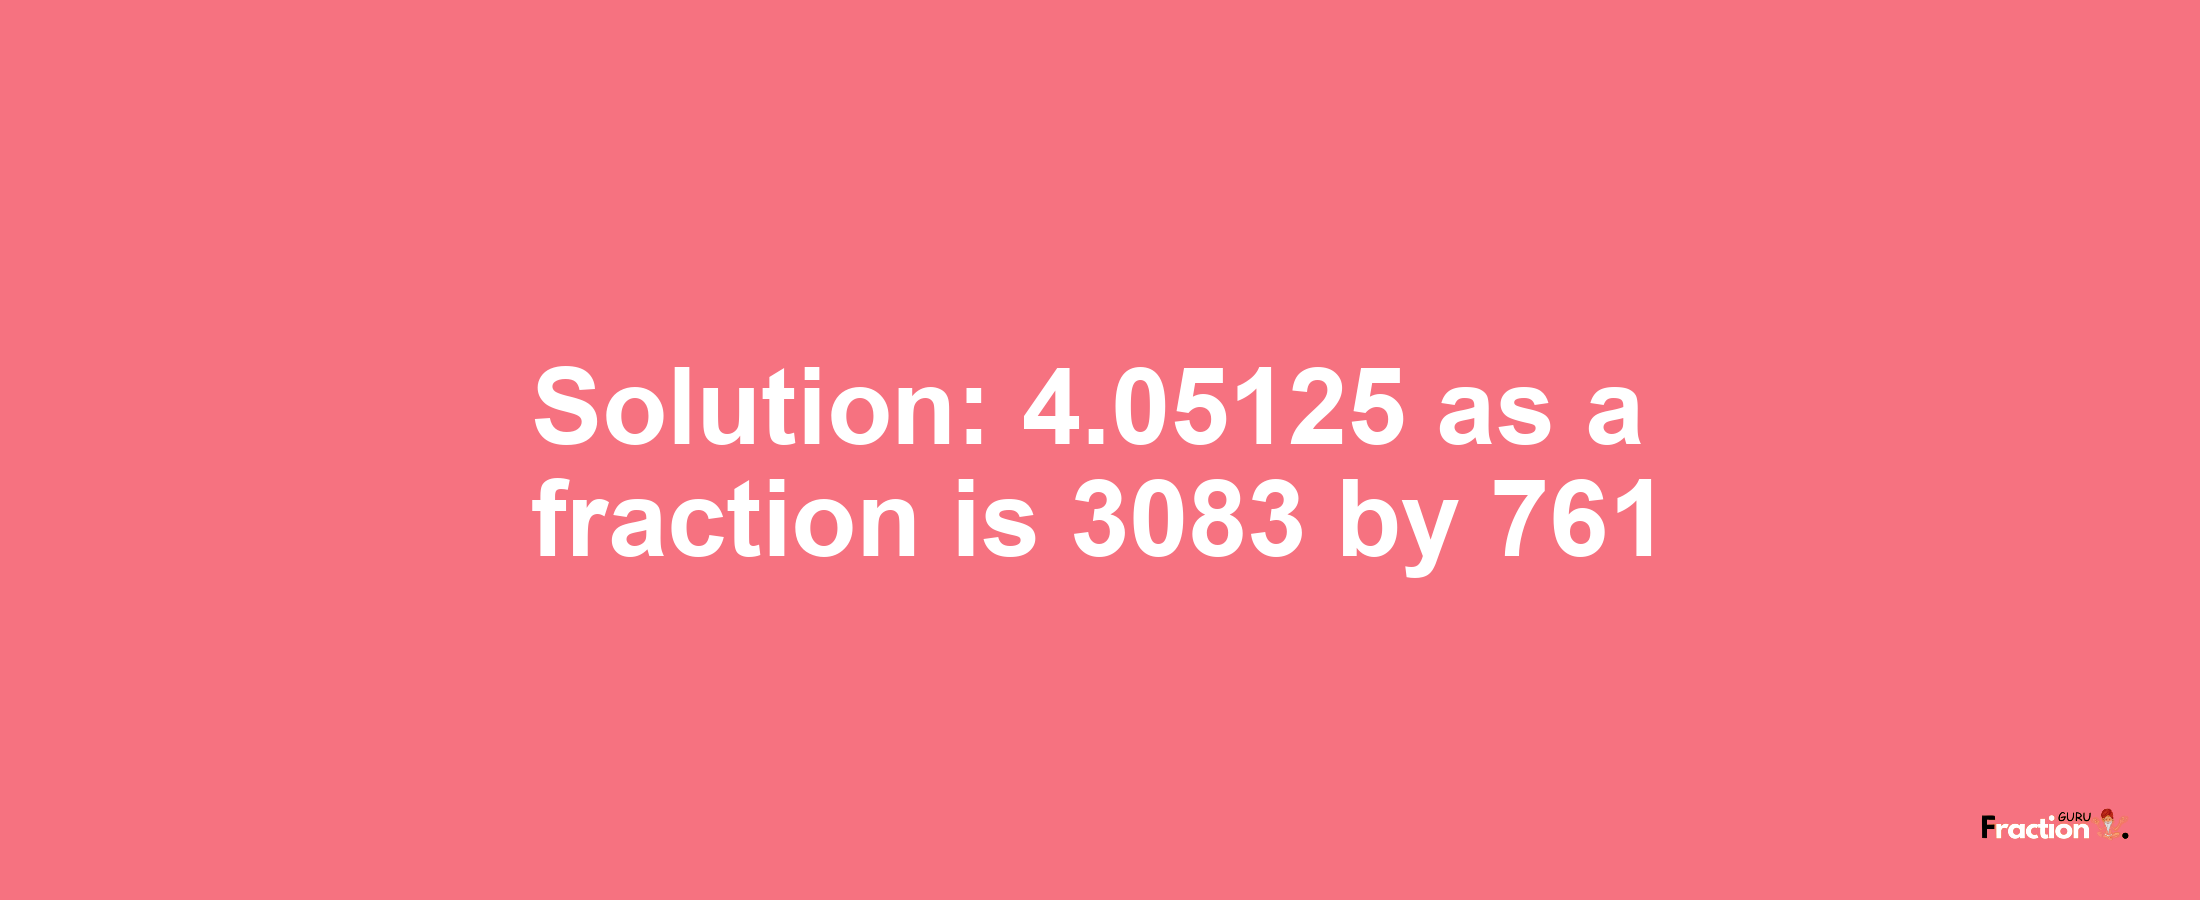 Solution:4.05125 as a fraction is 3083/761